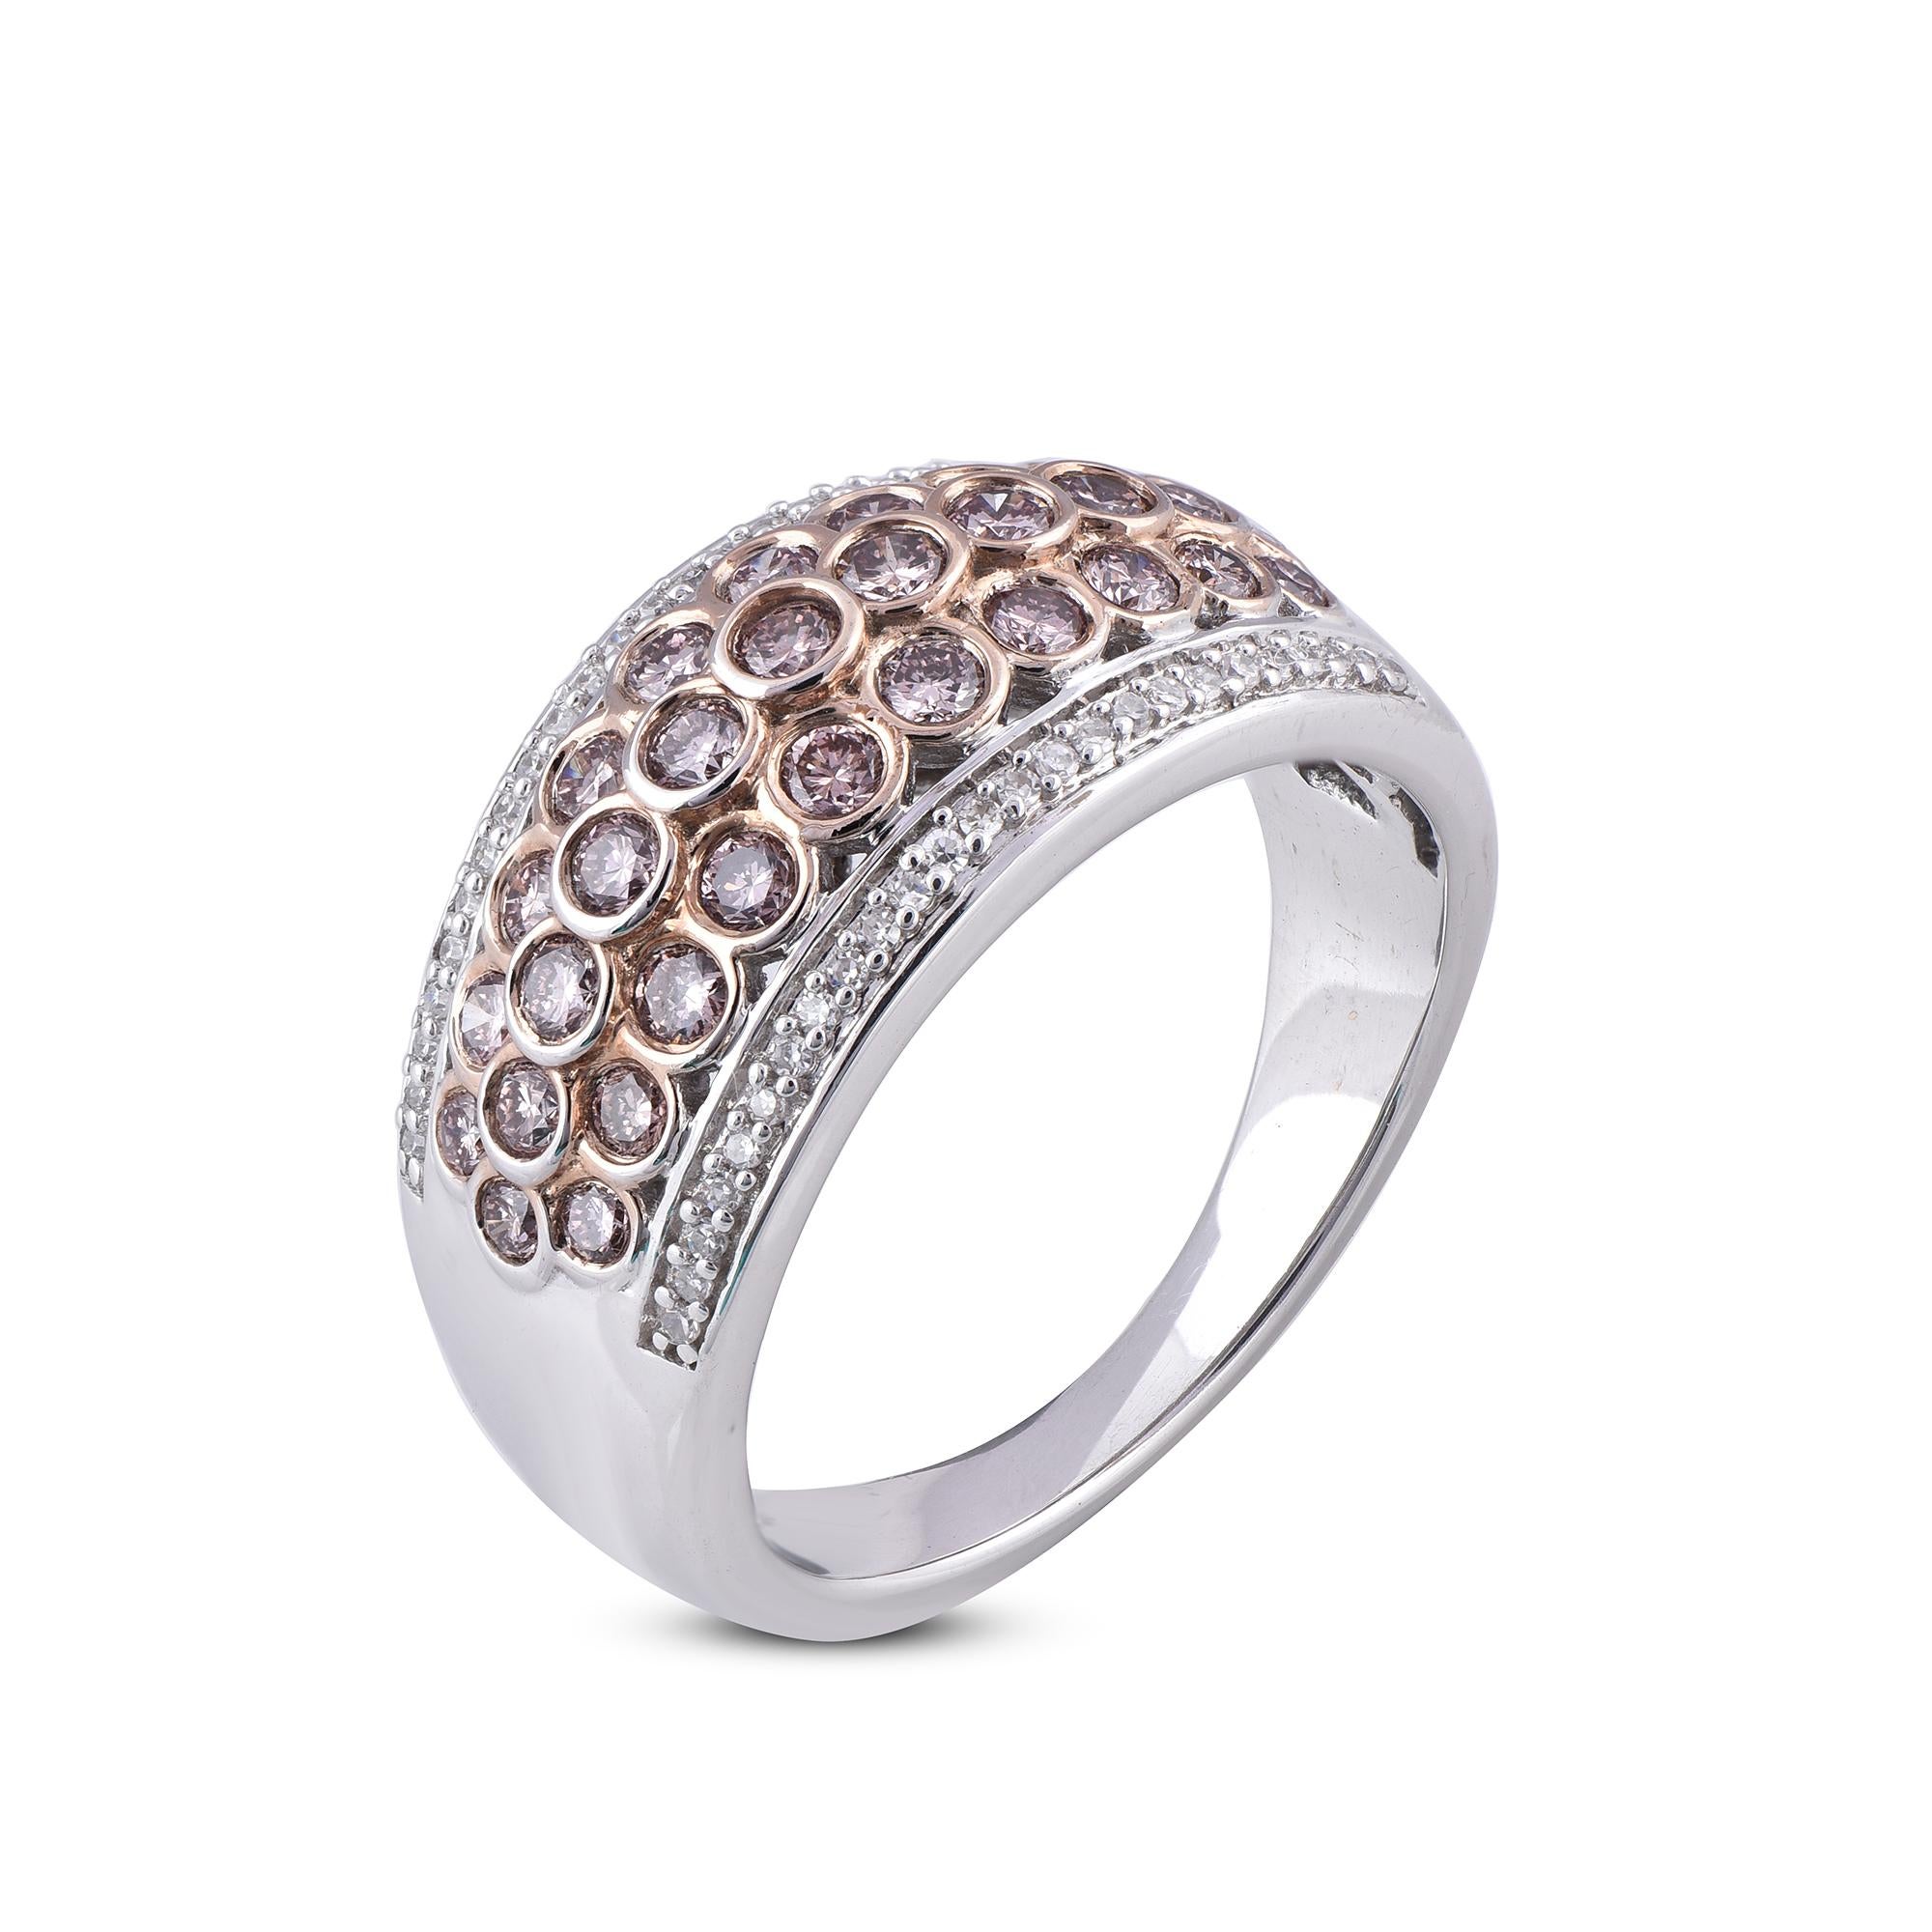 Classic and Contemporary, this diamond ring will enhance her jewelry collection. Embellished with 50 natural round and 31 pink diamonds 1.00 Carat diamond studded beautifully in bezel setting. Hand crafted beautifully in solid 18 Kt white gold and